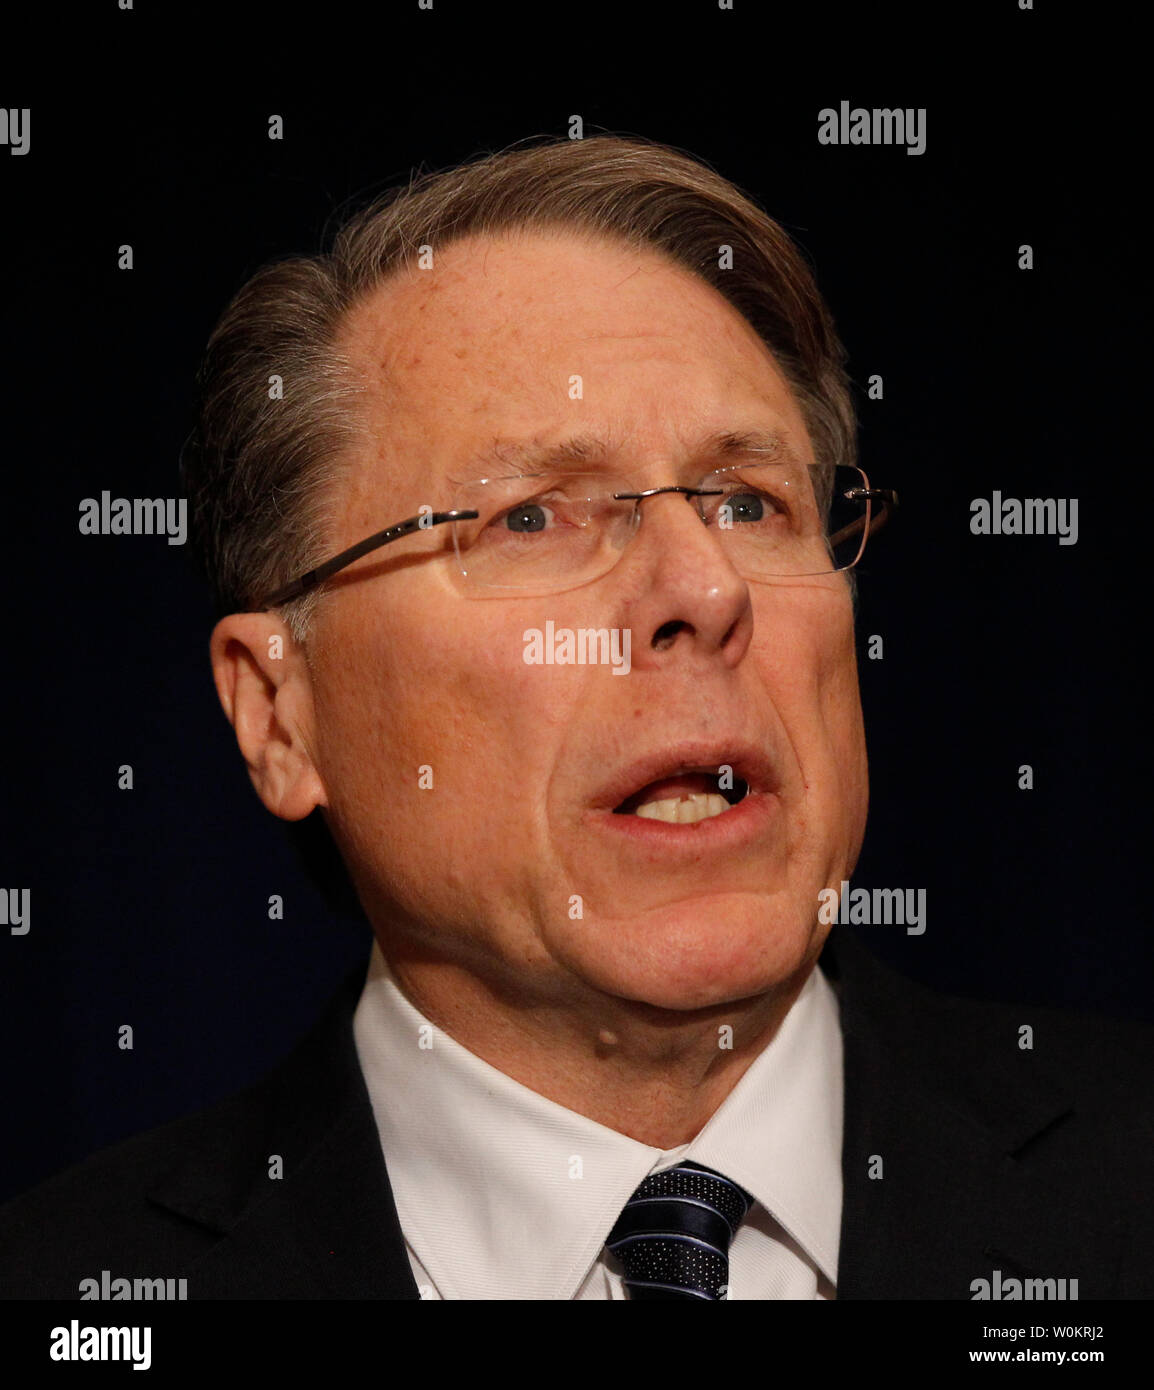 National Rifle Association (NRA) CEO Wayne LaPierre speaks during a press conference in Washington, DC, December 21, 2012.   Today marks one week since the Sandy Hook elementary  school masacre in Newtown, Connecticut where 20 children and 6 adults were killed in one of the deadliest school shootings in U.S. history.  UPI/Molly Riley Stock Photo